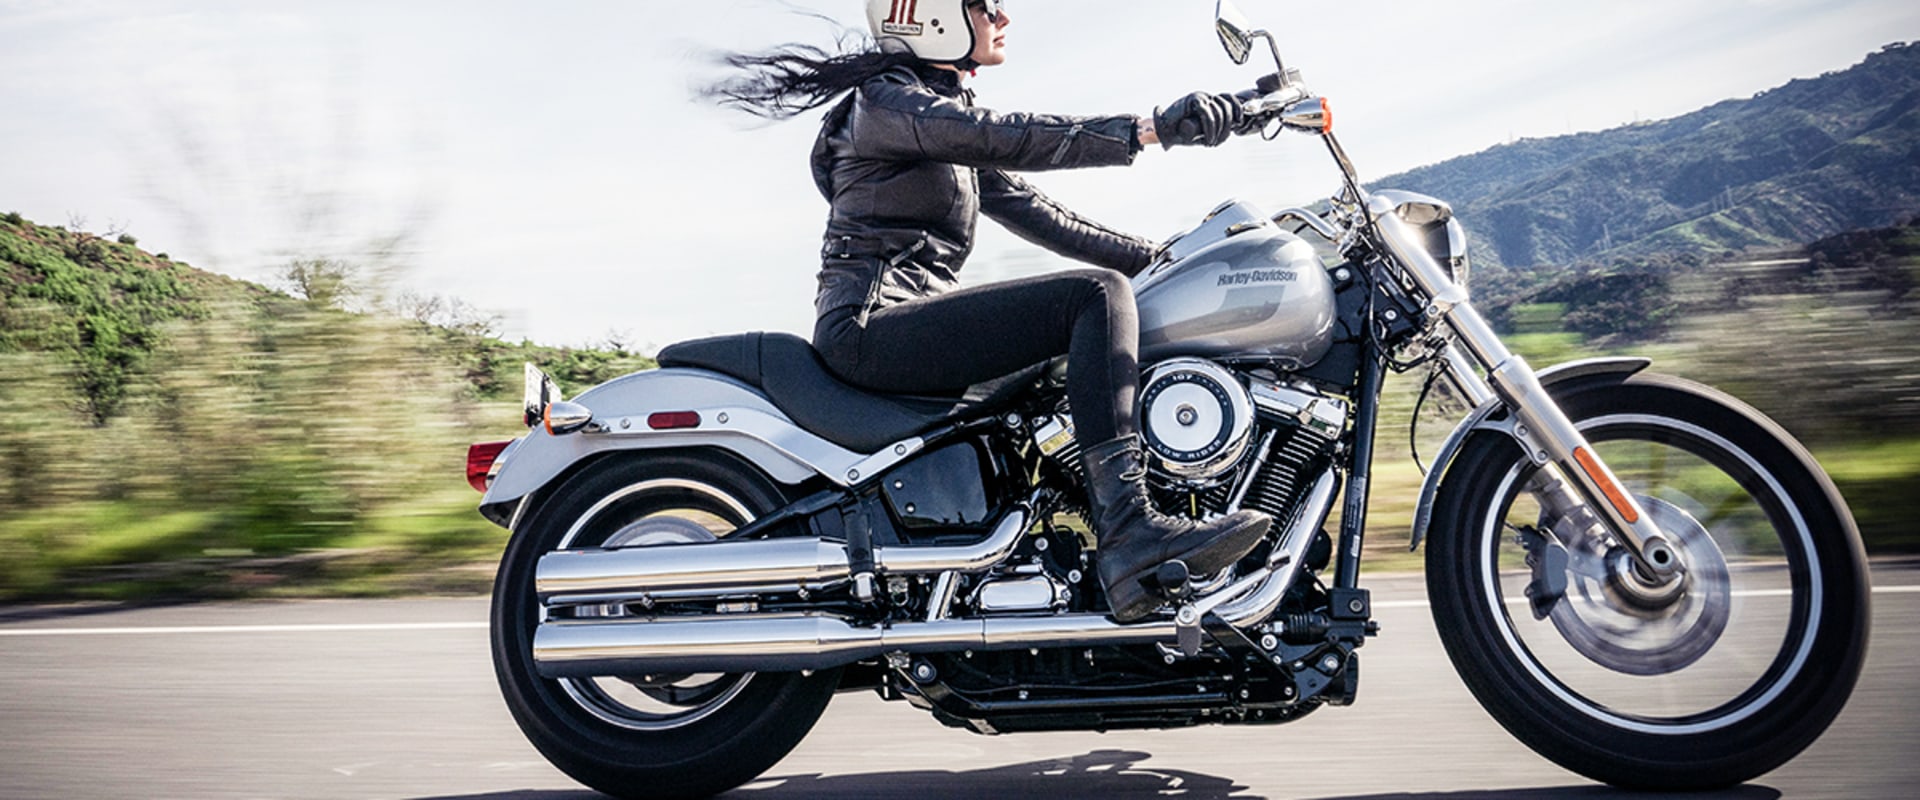 Does Motorcycle Insurance Cover Helmet Replacement?